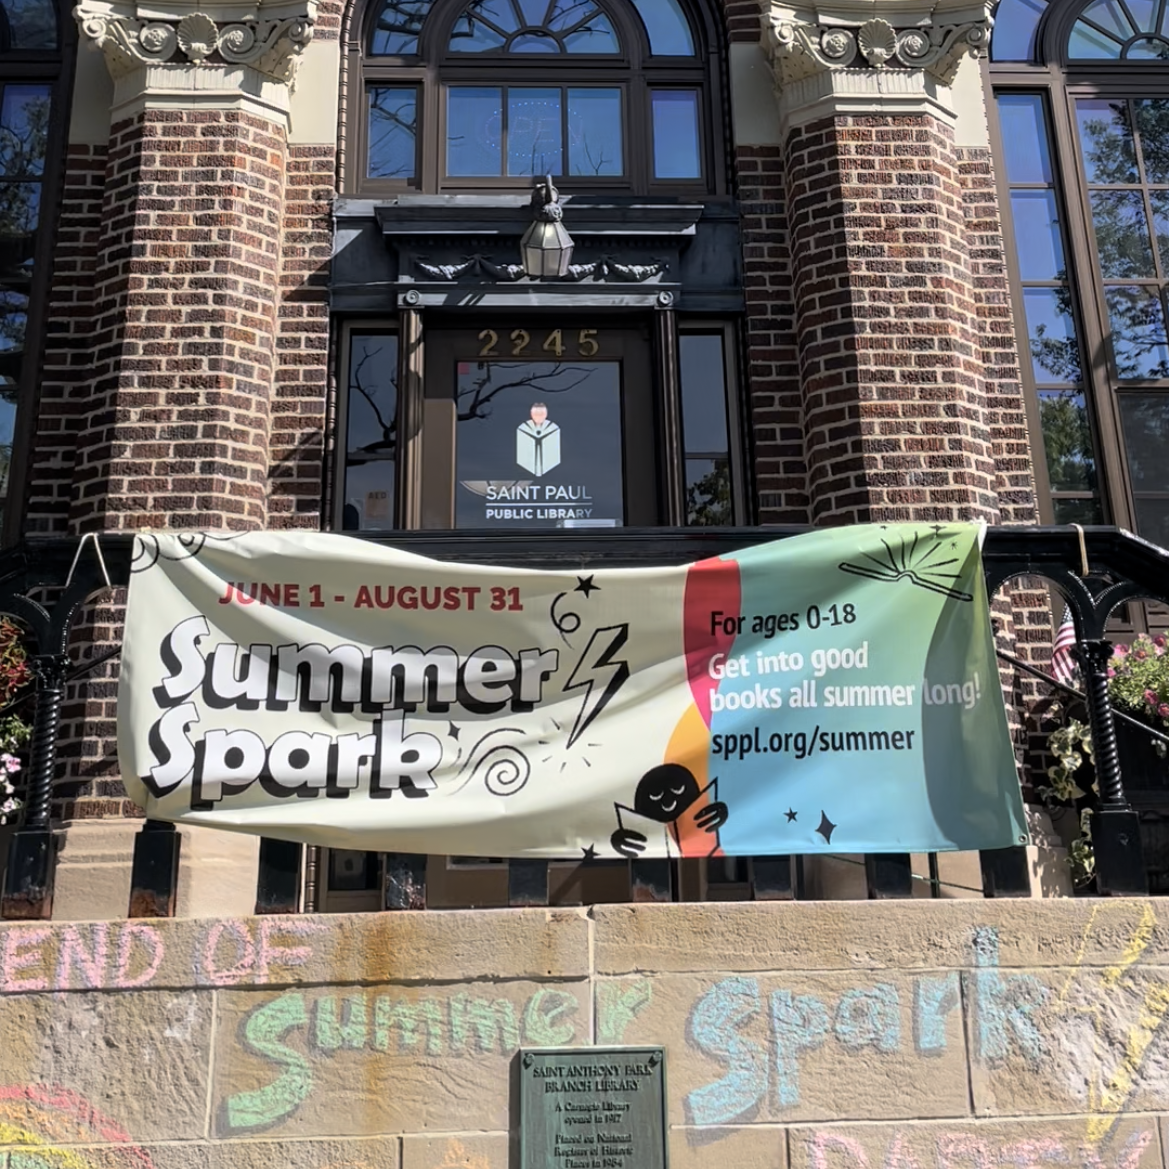 A photo of the St. Anthony Park Branch Library front entrance with their summer spark banner.